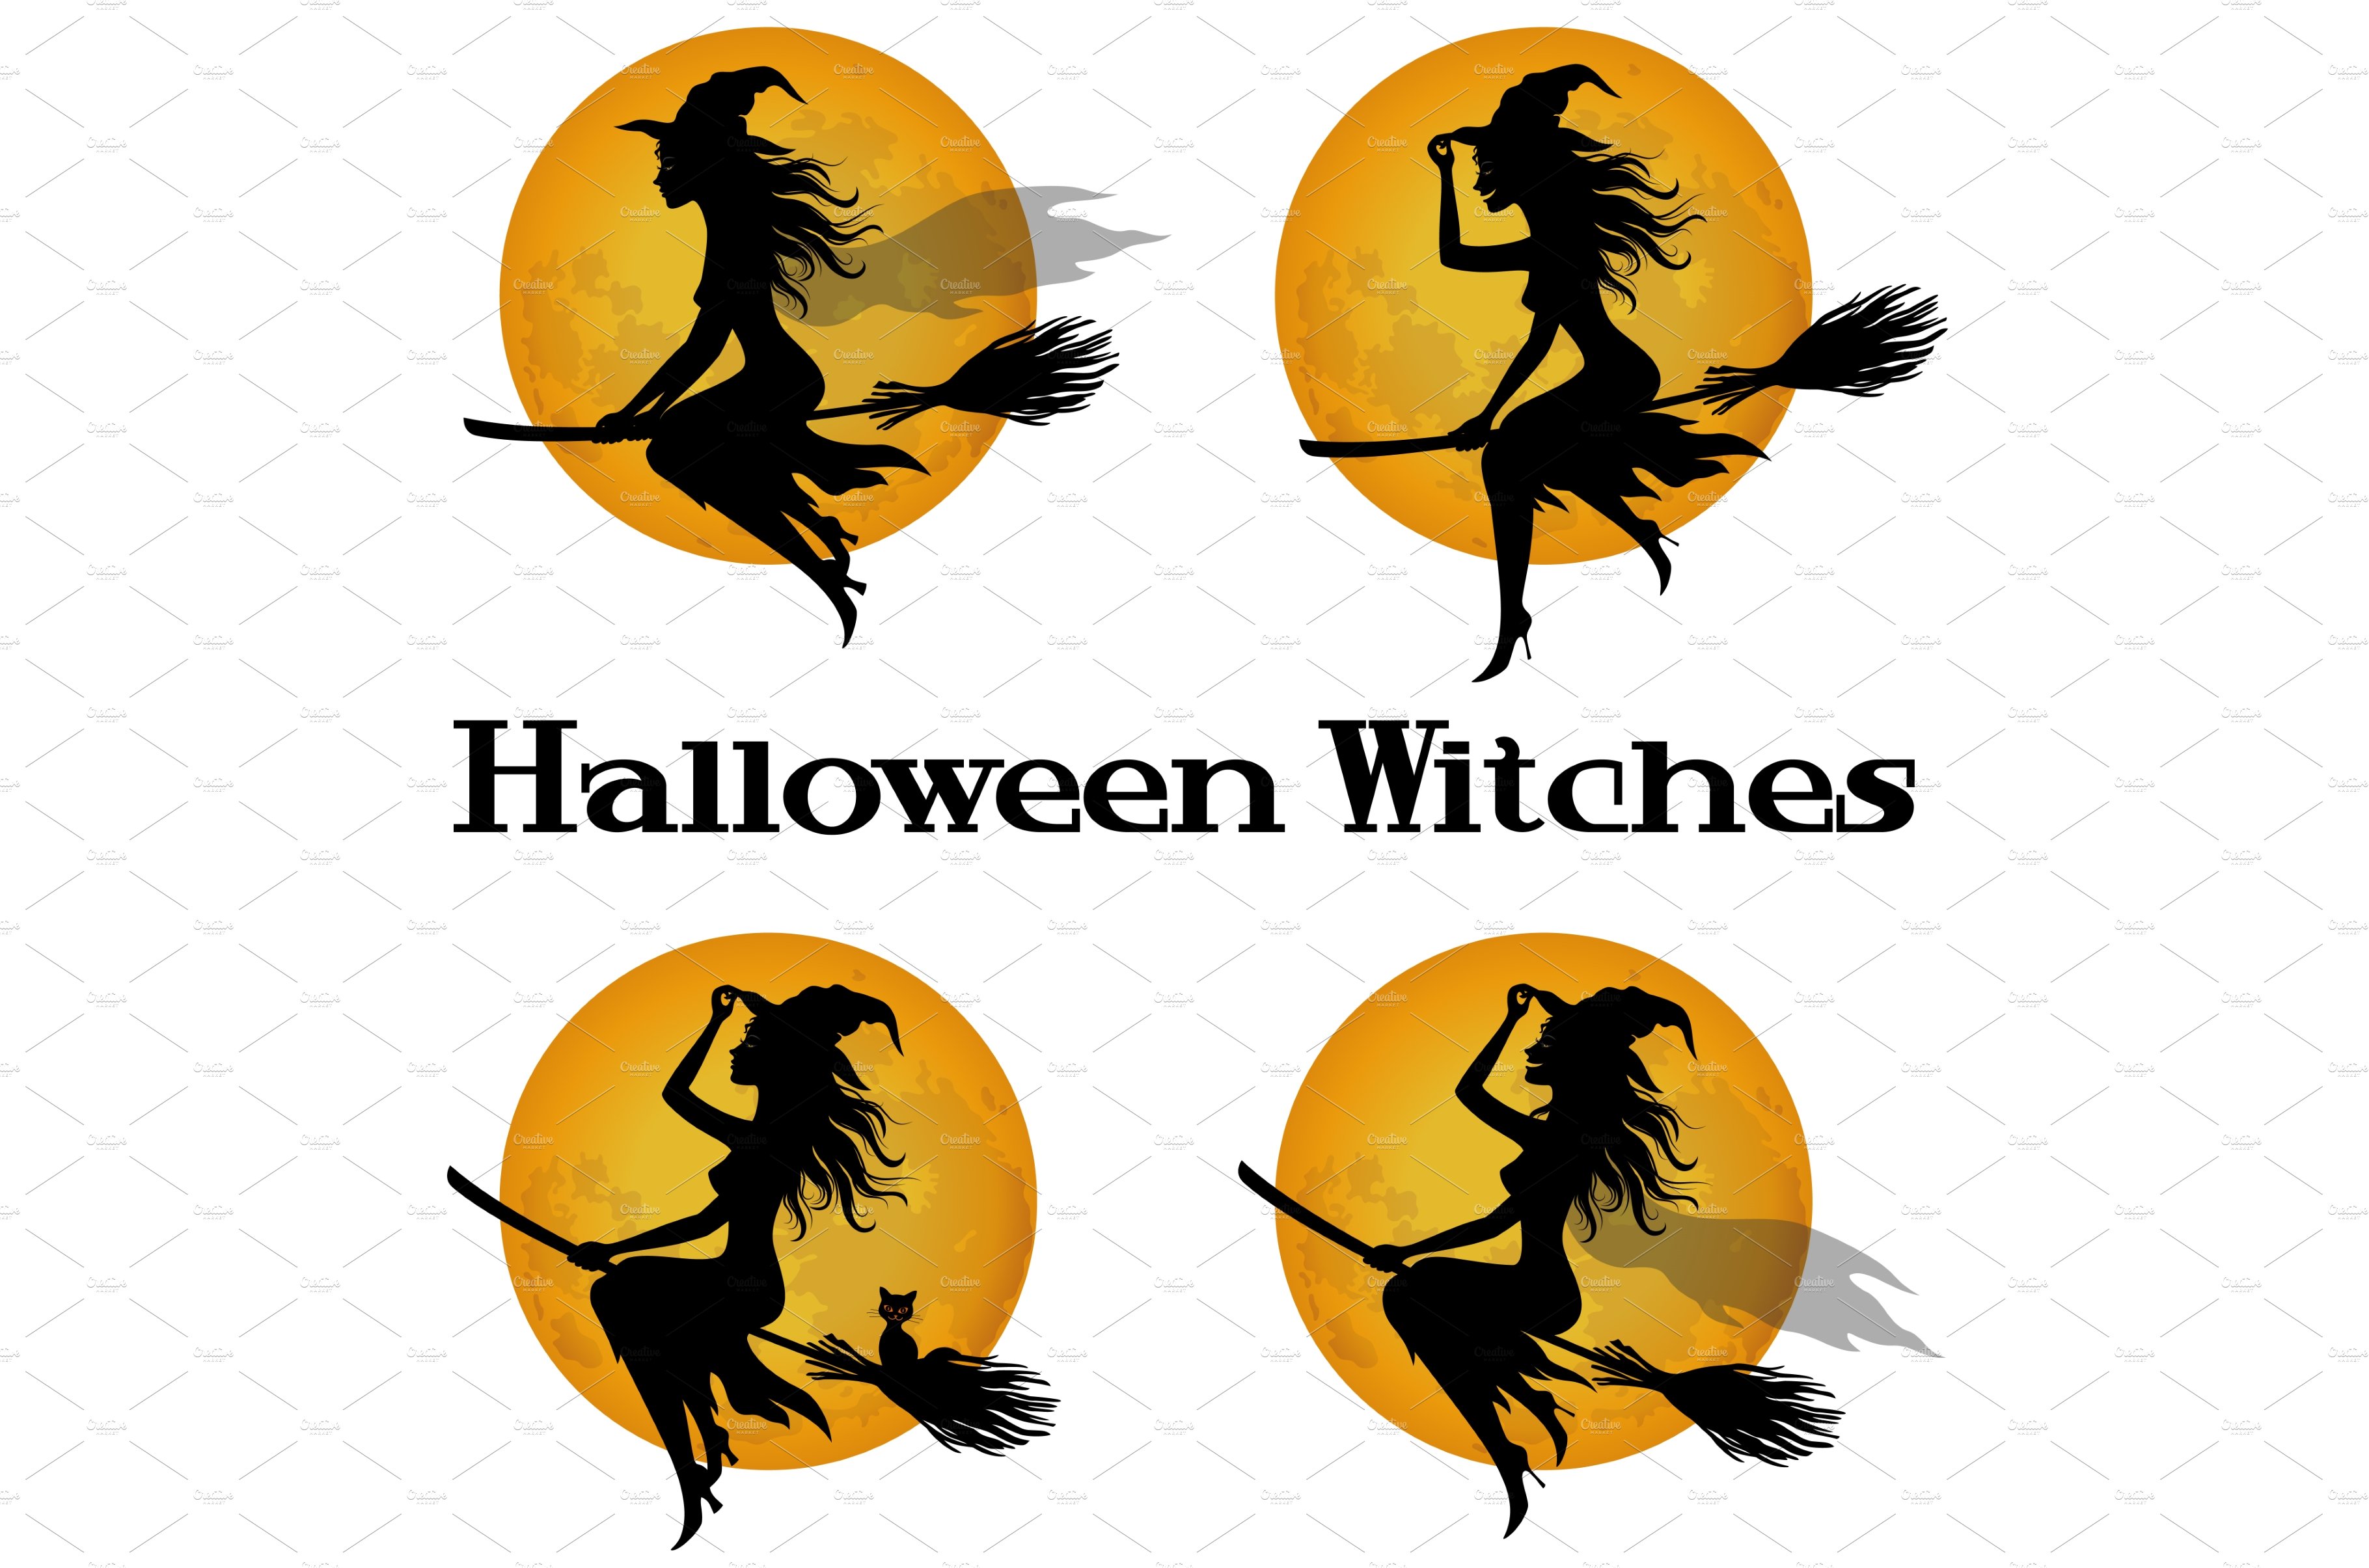 Witch Flying on Broom cover image.